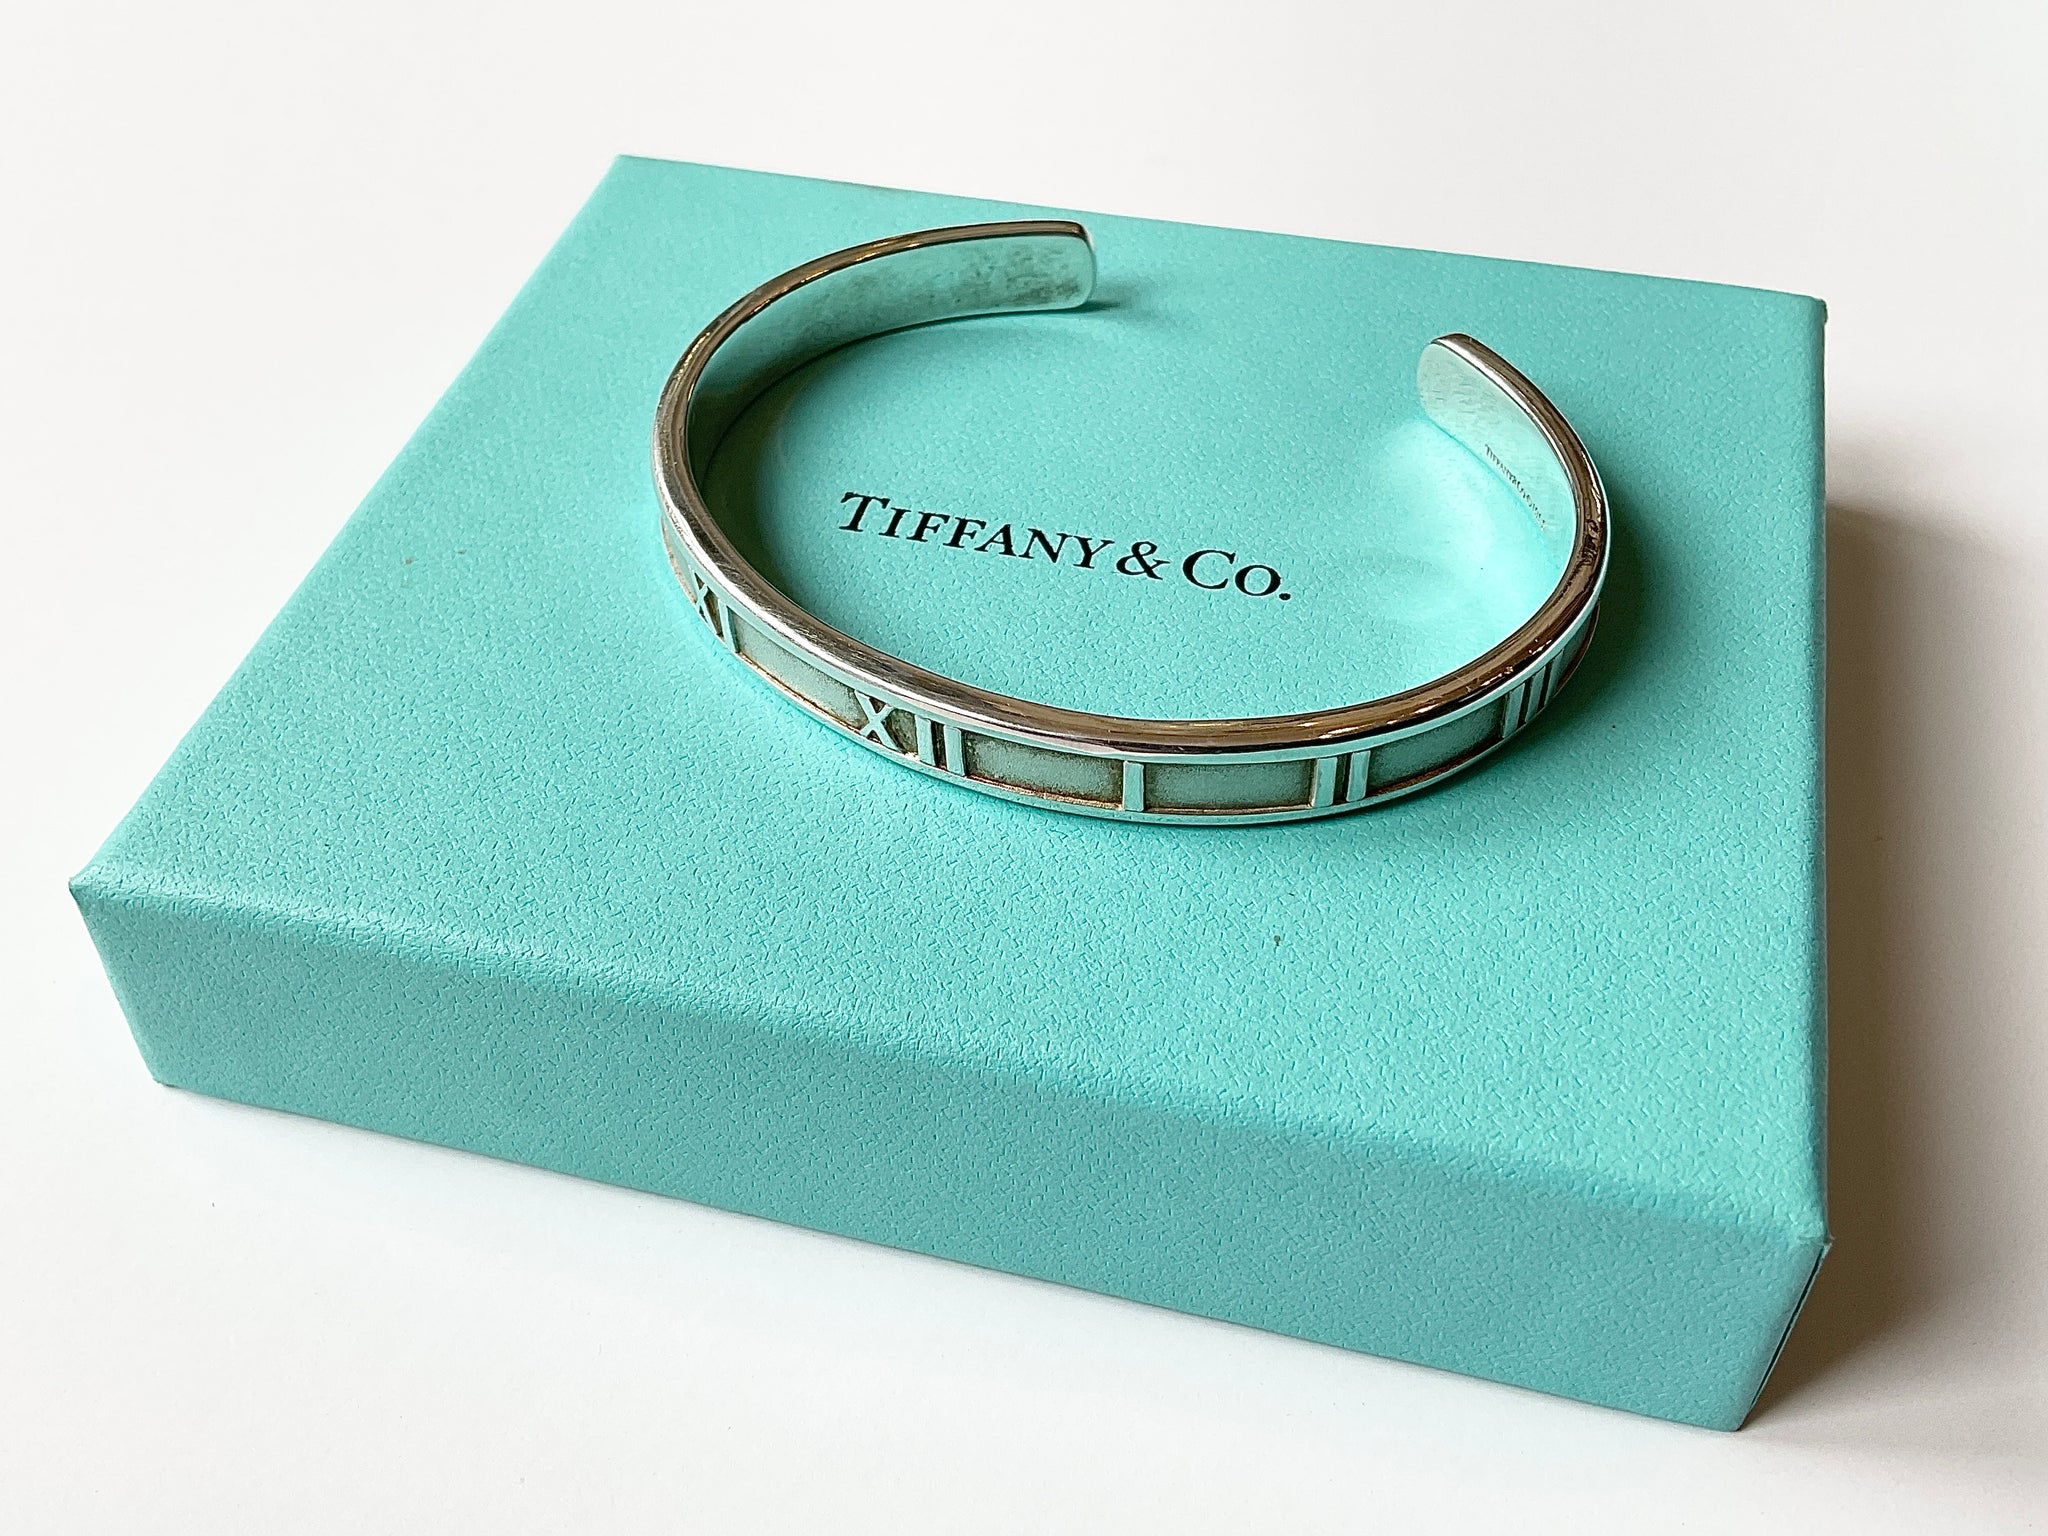 The itbangle battle Can the Tiffany Lock challenge the Cartier Love   Vogue Business